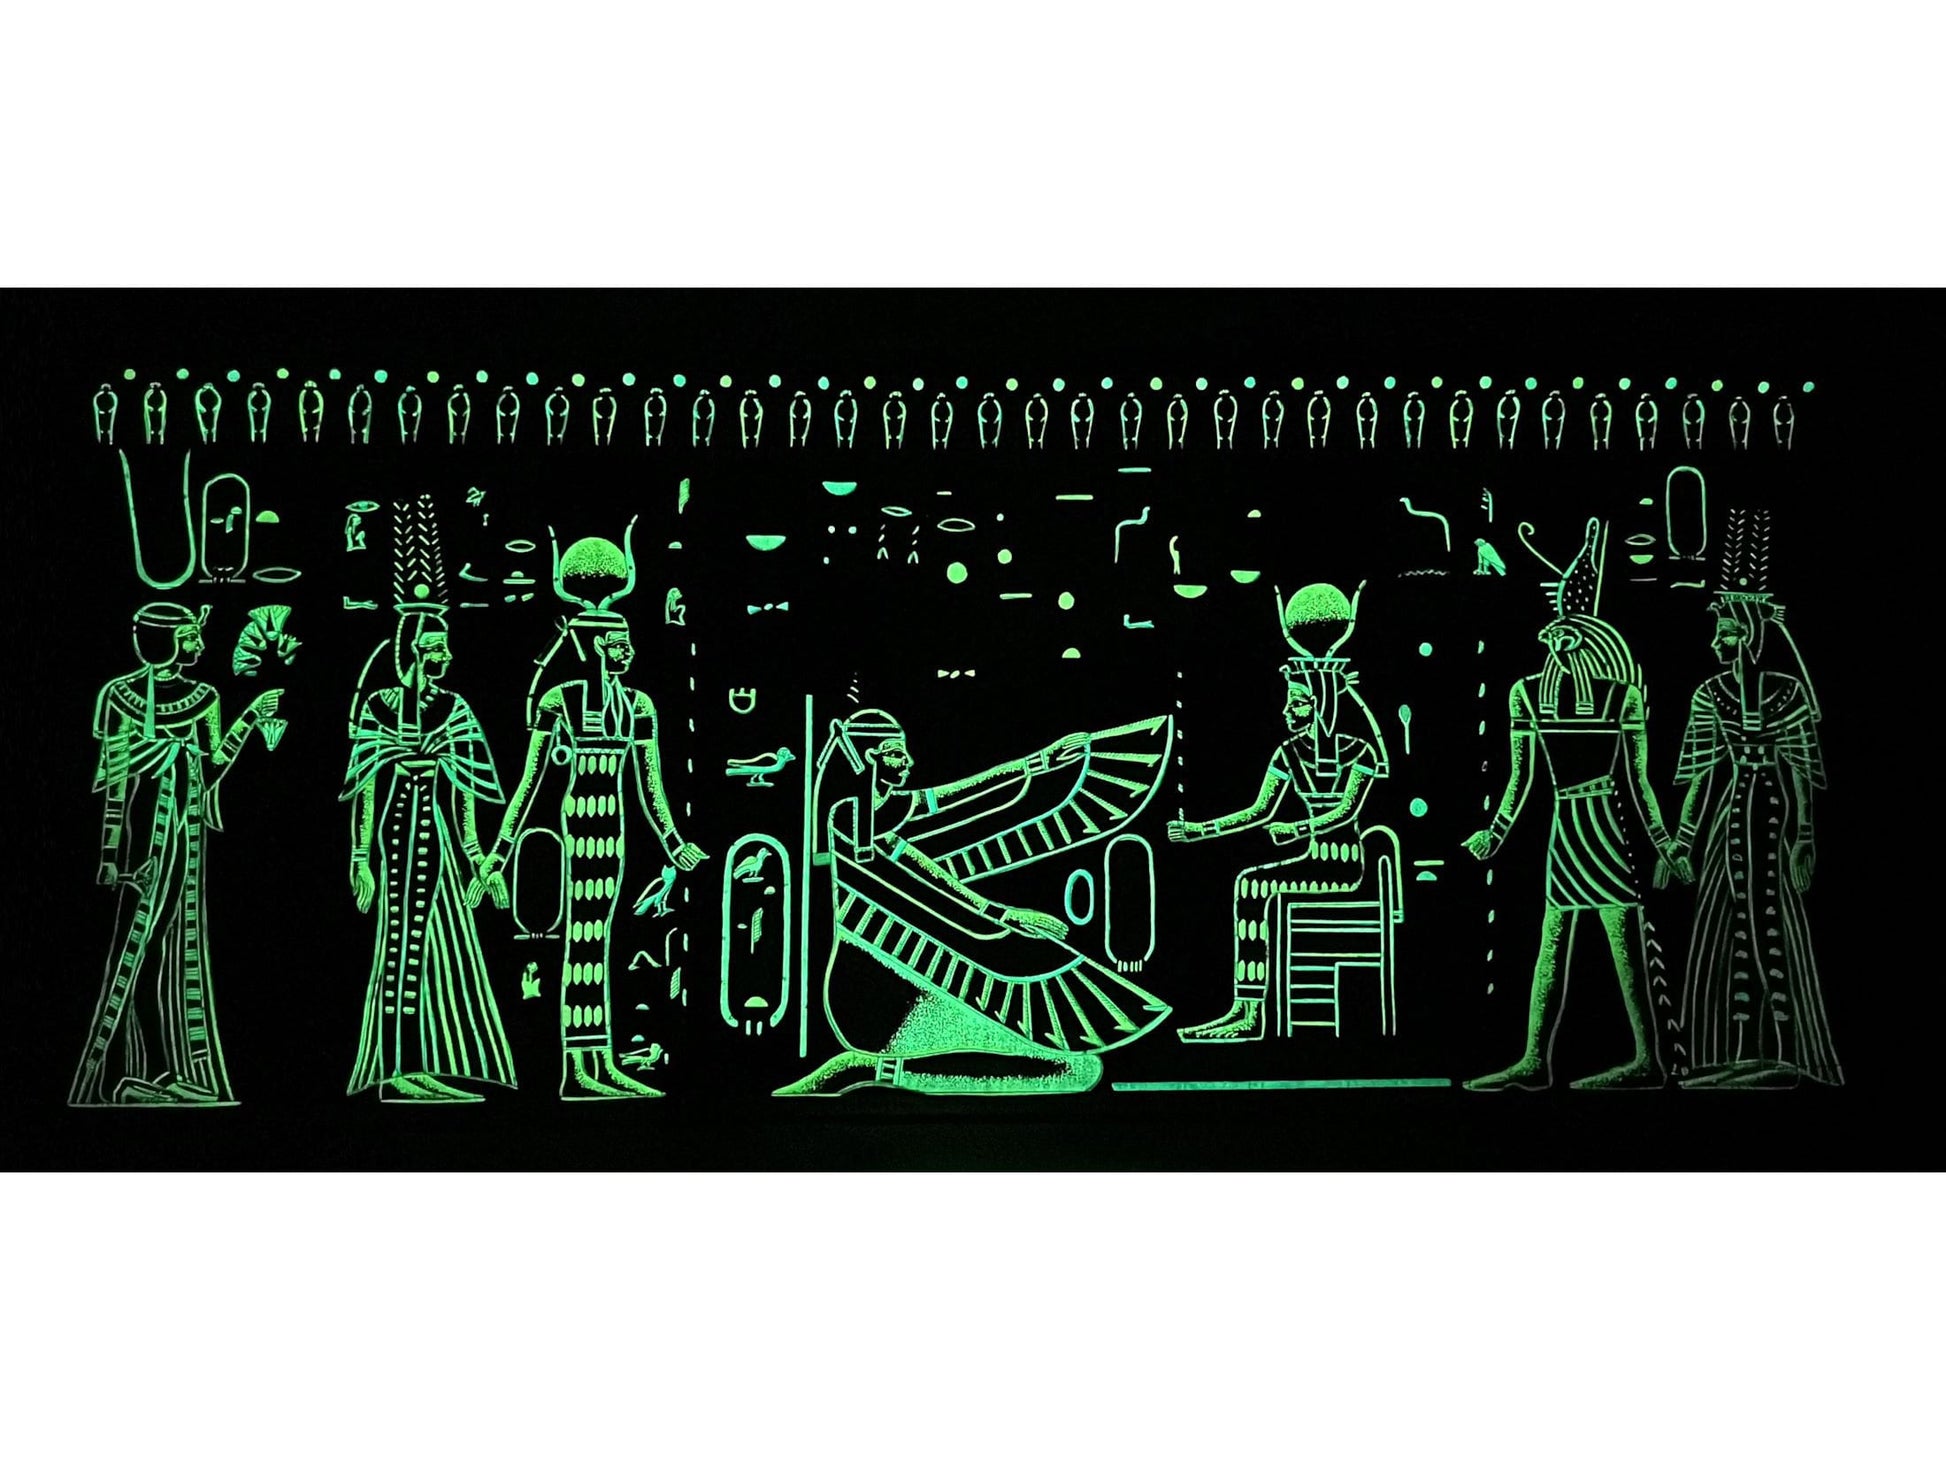 Wall Art Decor Ancient Egyptian Painting - Horus Leading Nefertari into the Afterlife & Goddesses Maat and Isis - 36x16 inches Extra Large